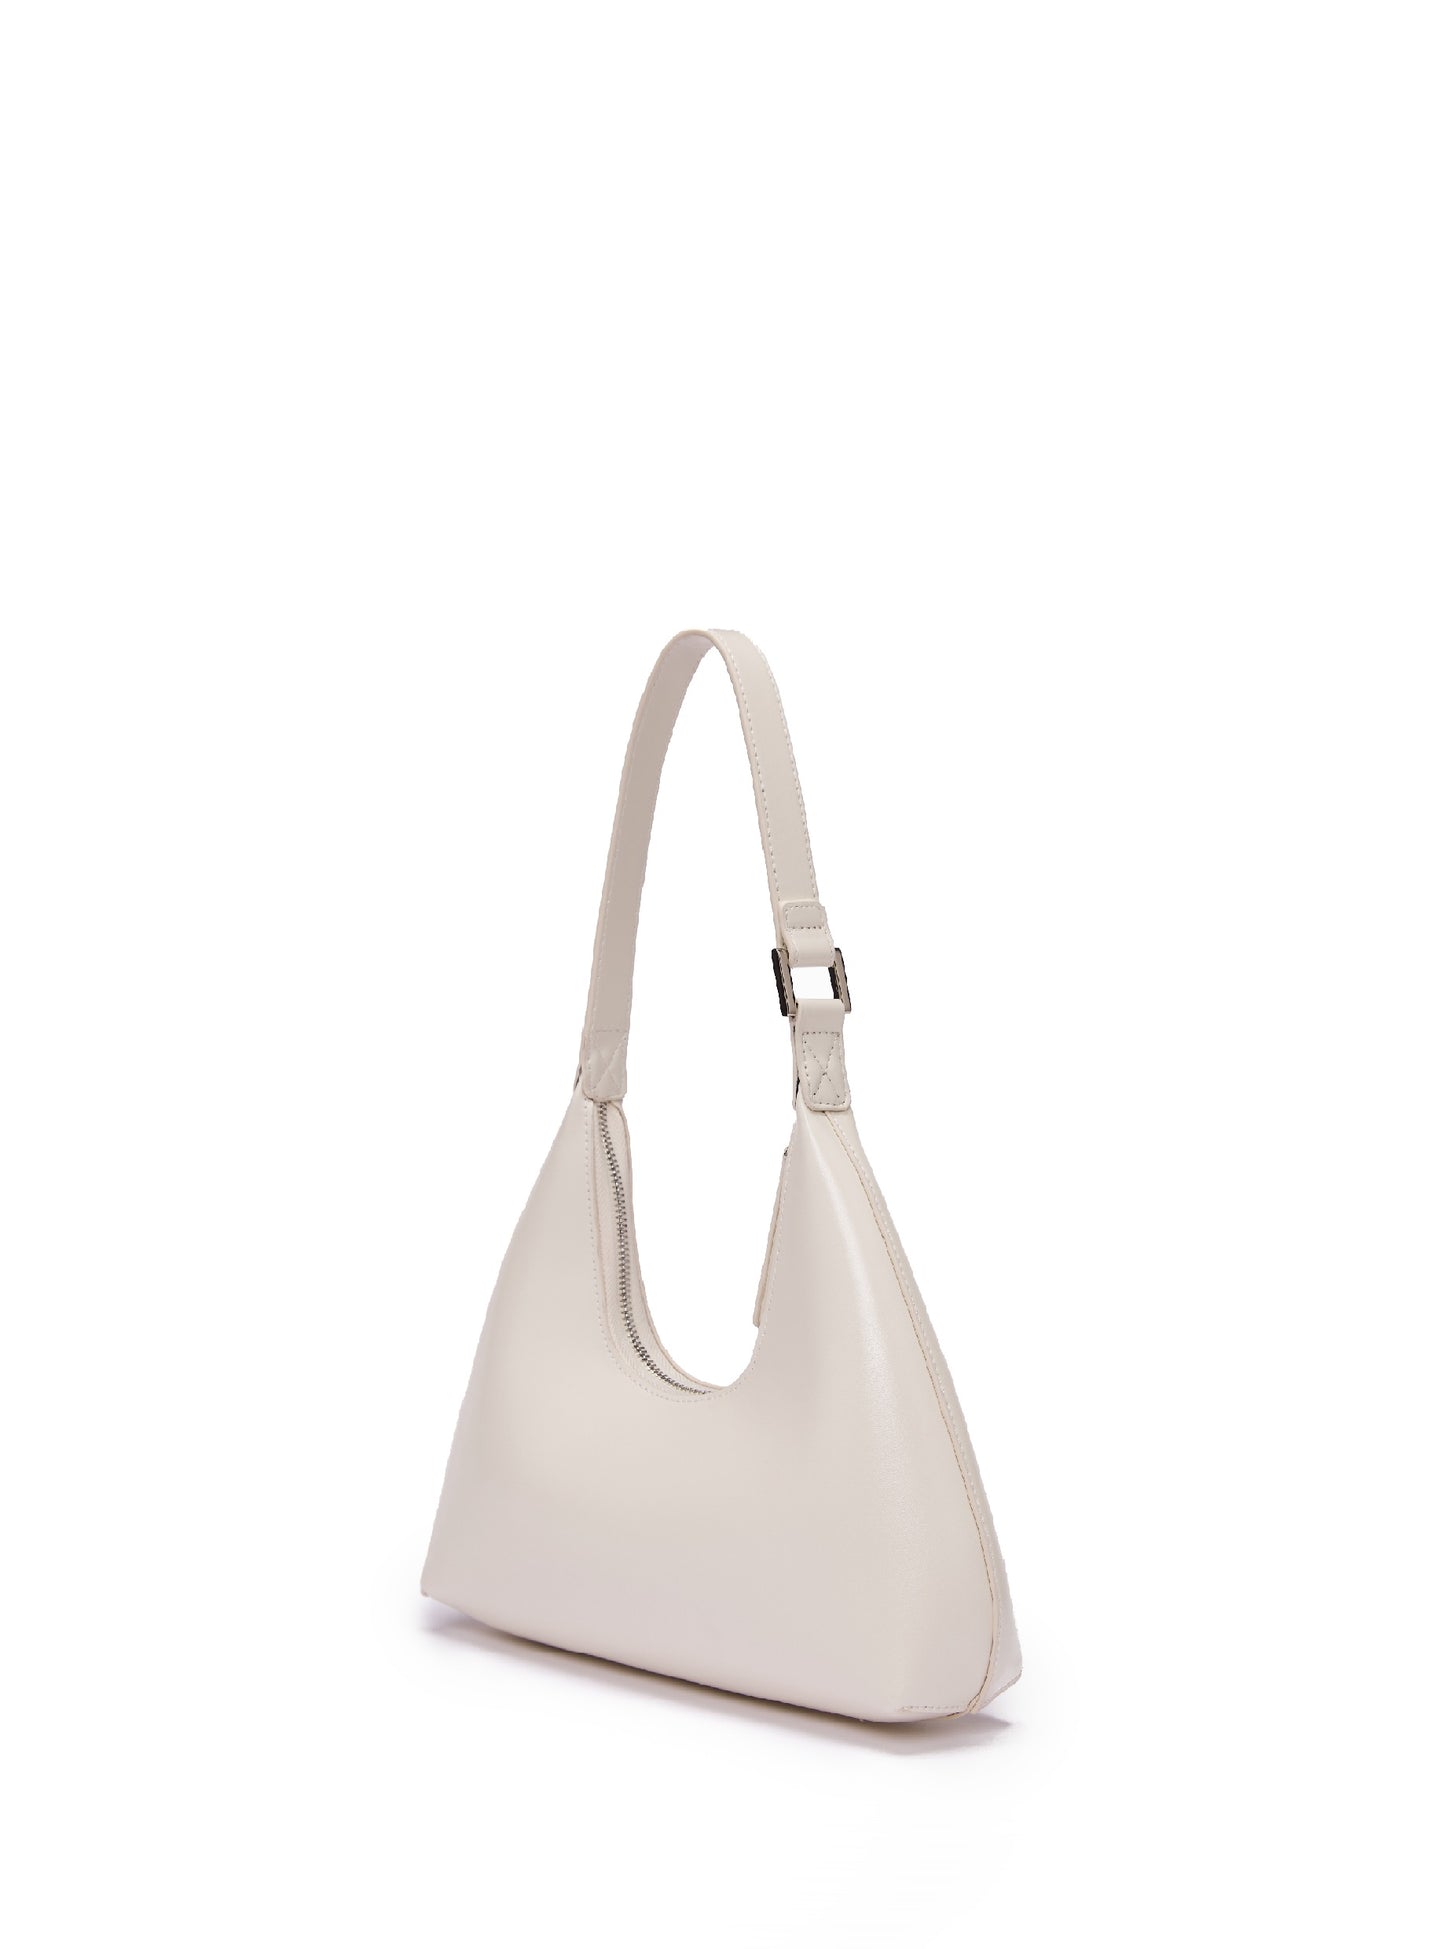 Alexia Bag in Smooth Leather, Beige